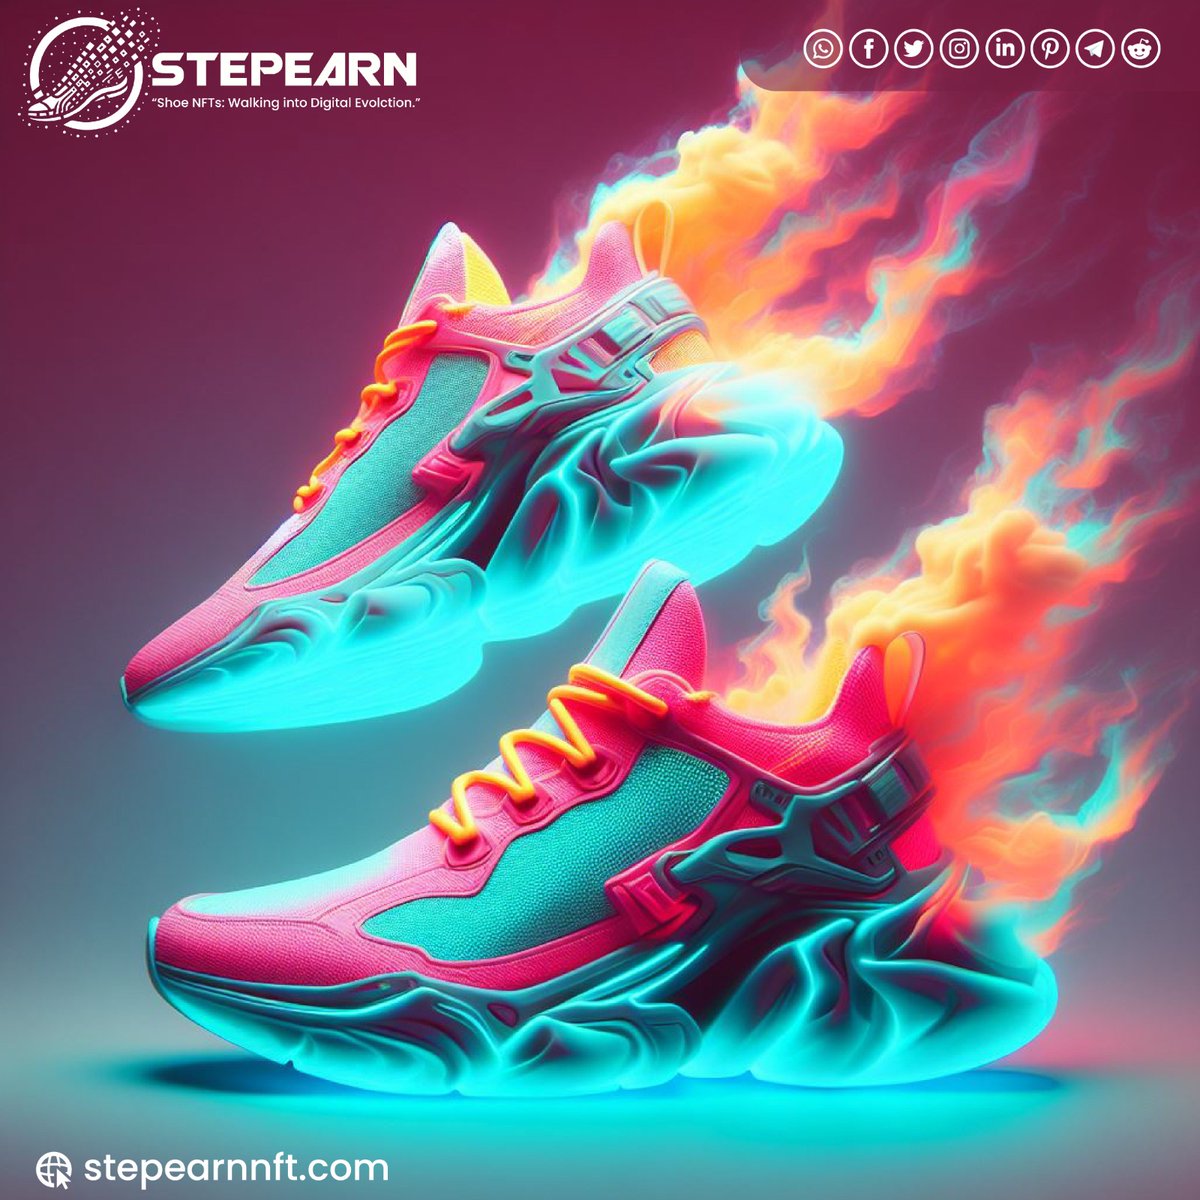 'Introducing Stepearn's Exclusive New Product: Elevate Your Style with Innovation! 👟✨ #StepearnExclusive #InnovativeFashion